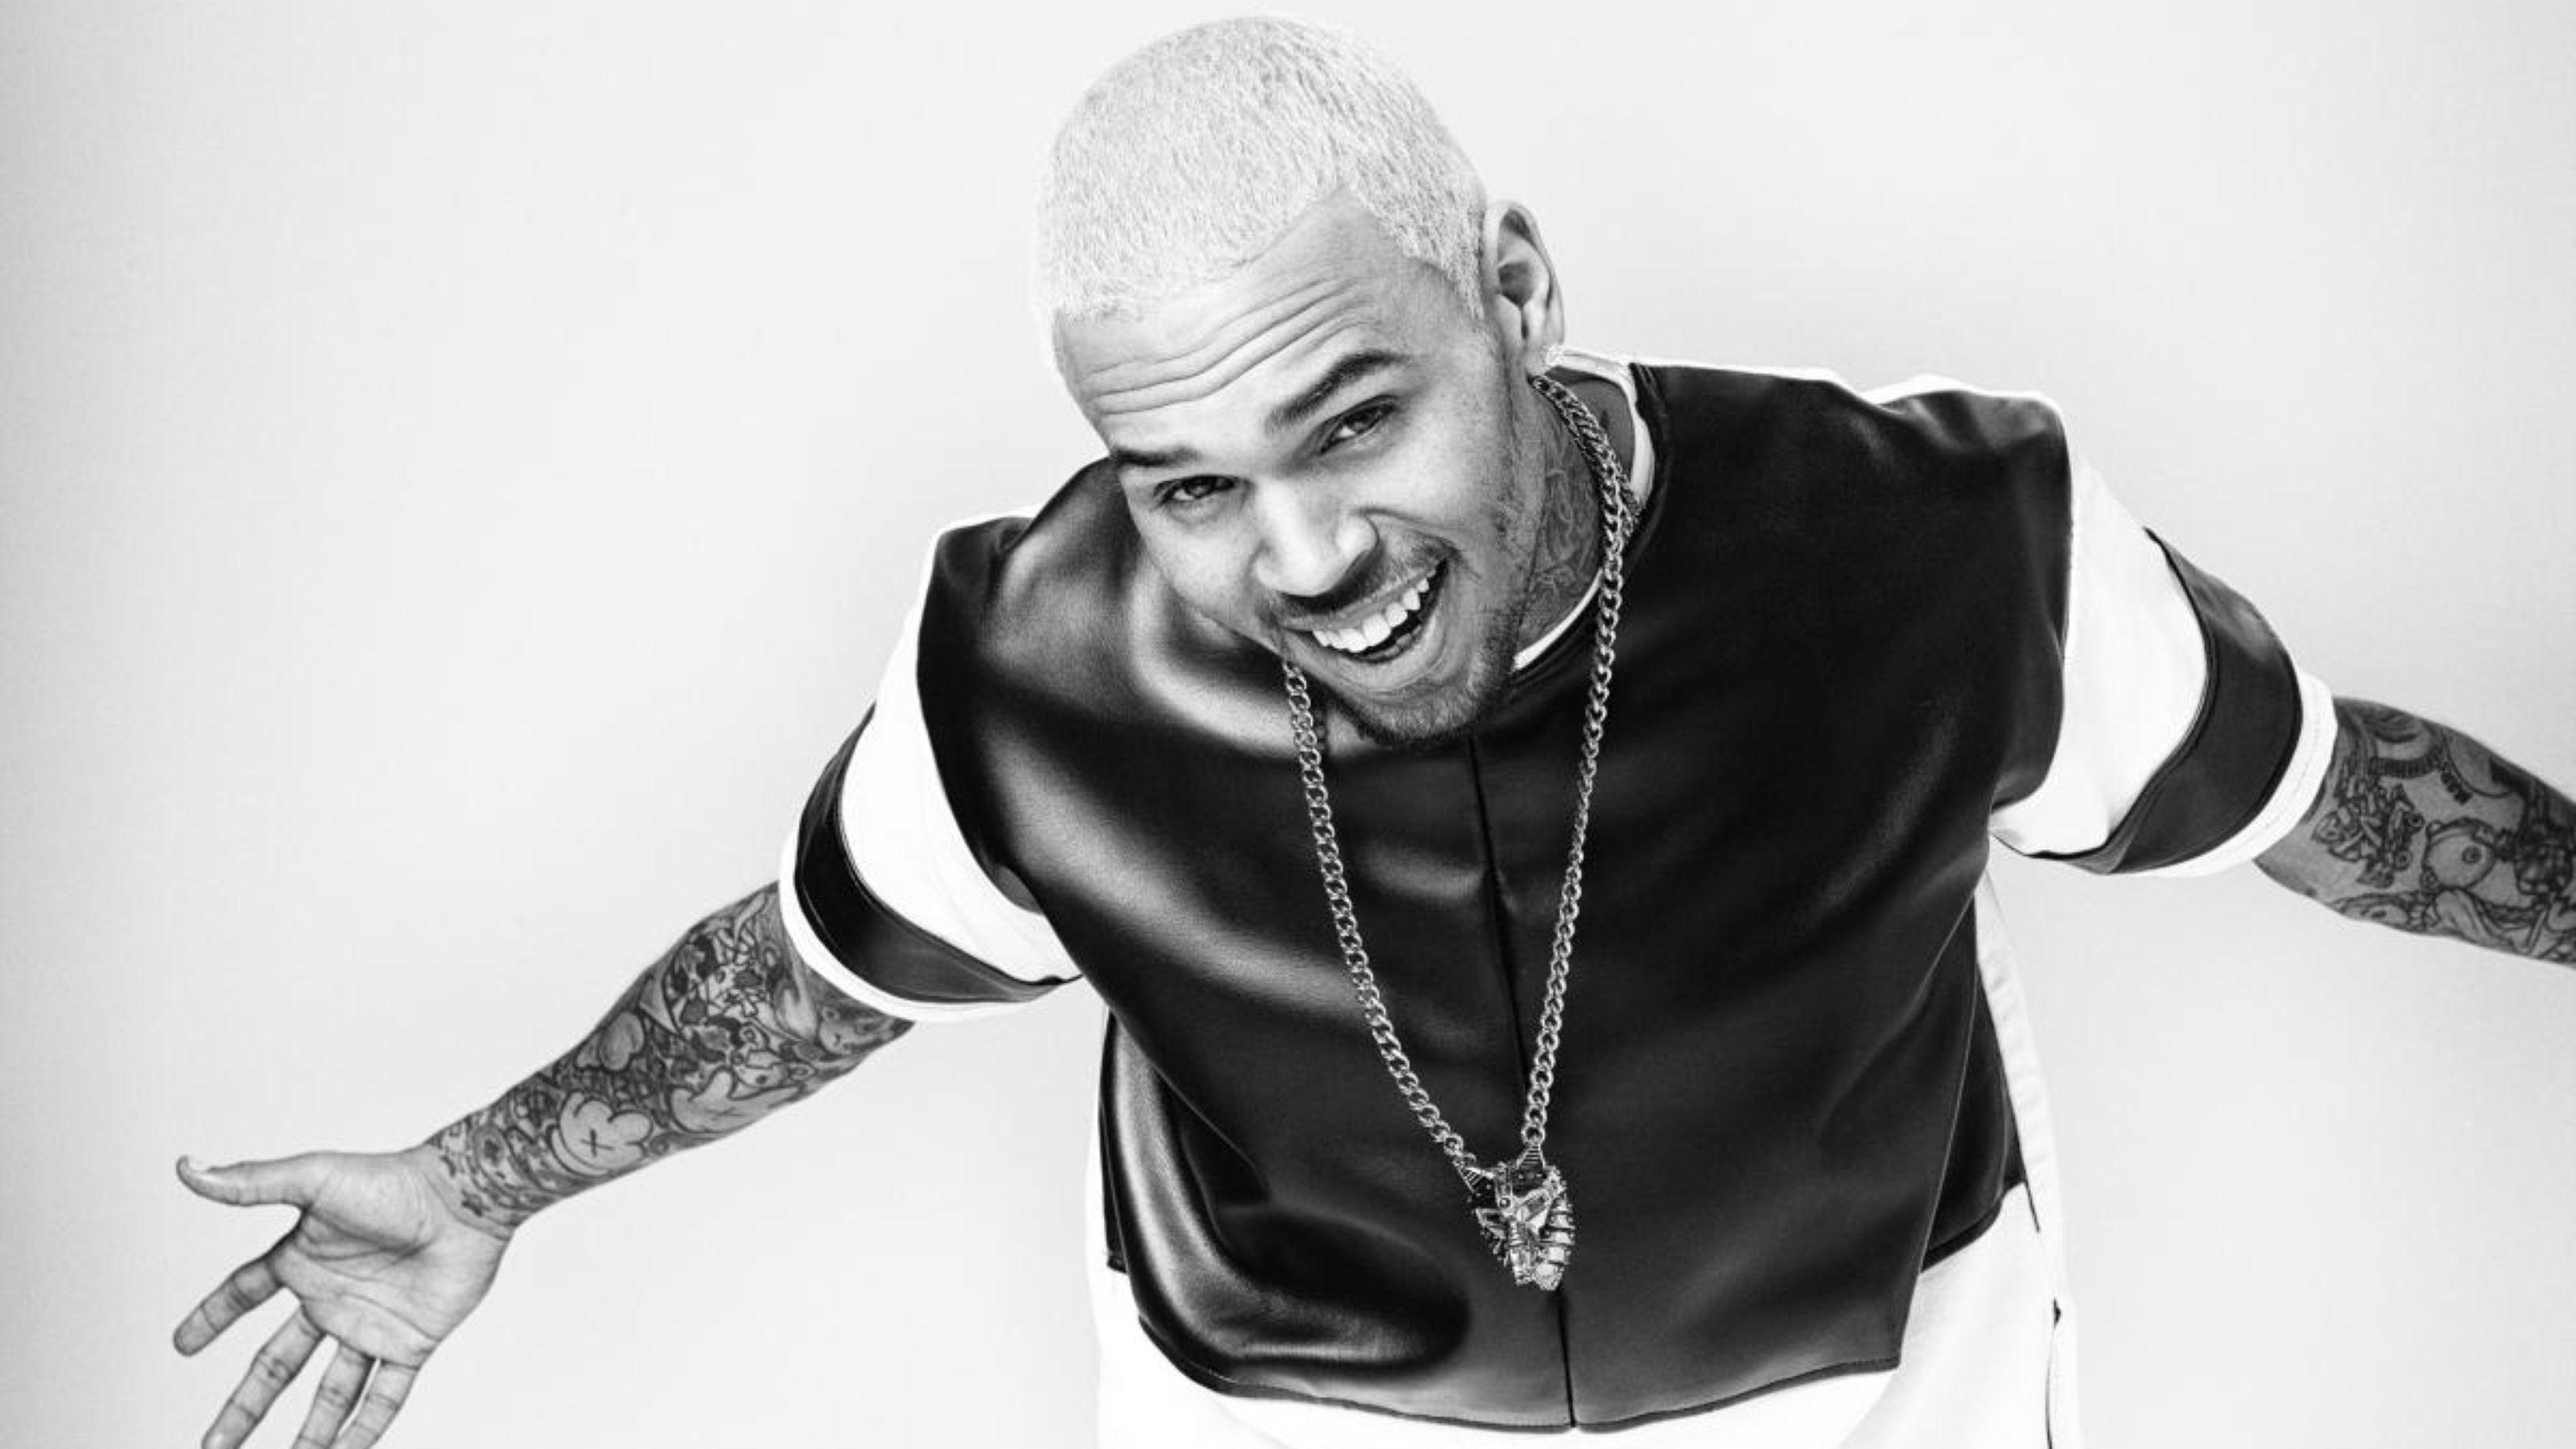 Chris Brown Wallpaper and Picture Collection